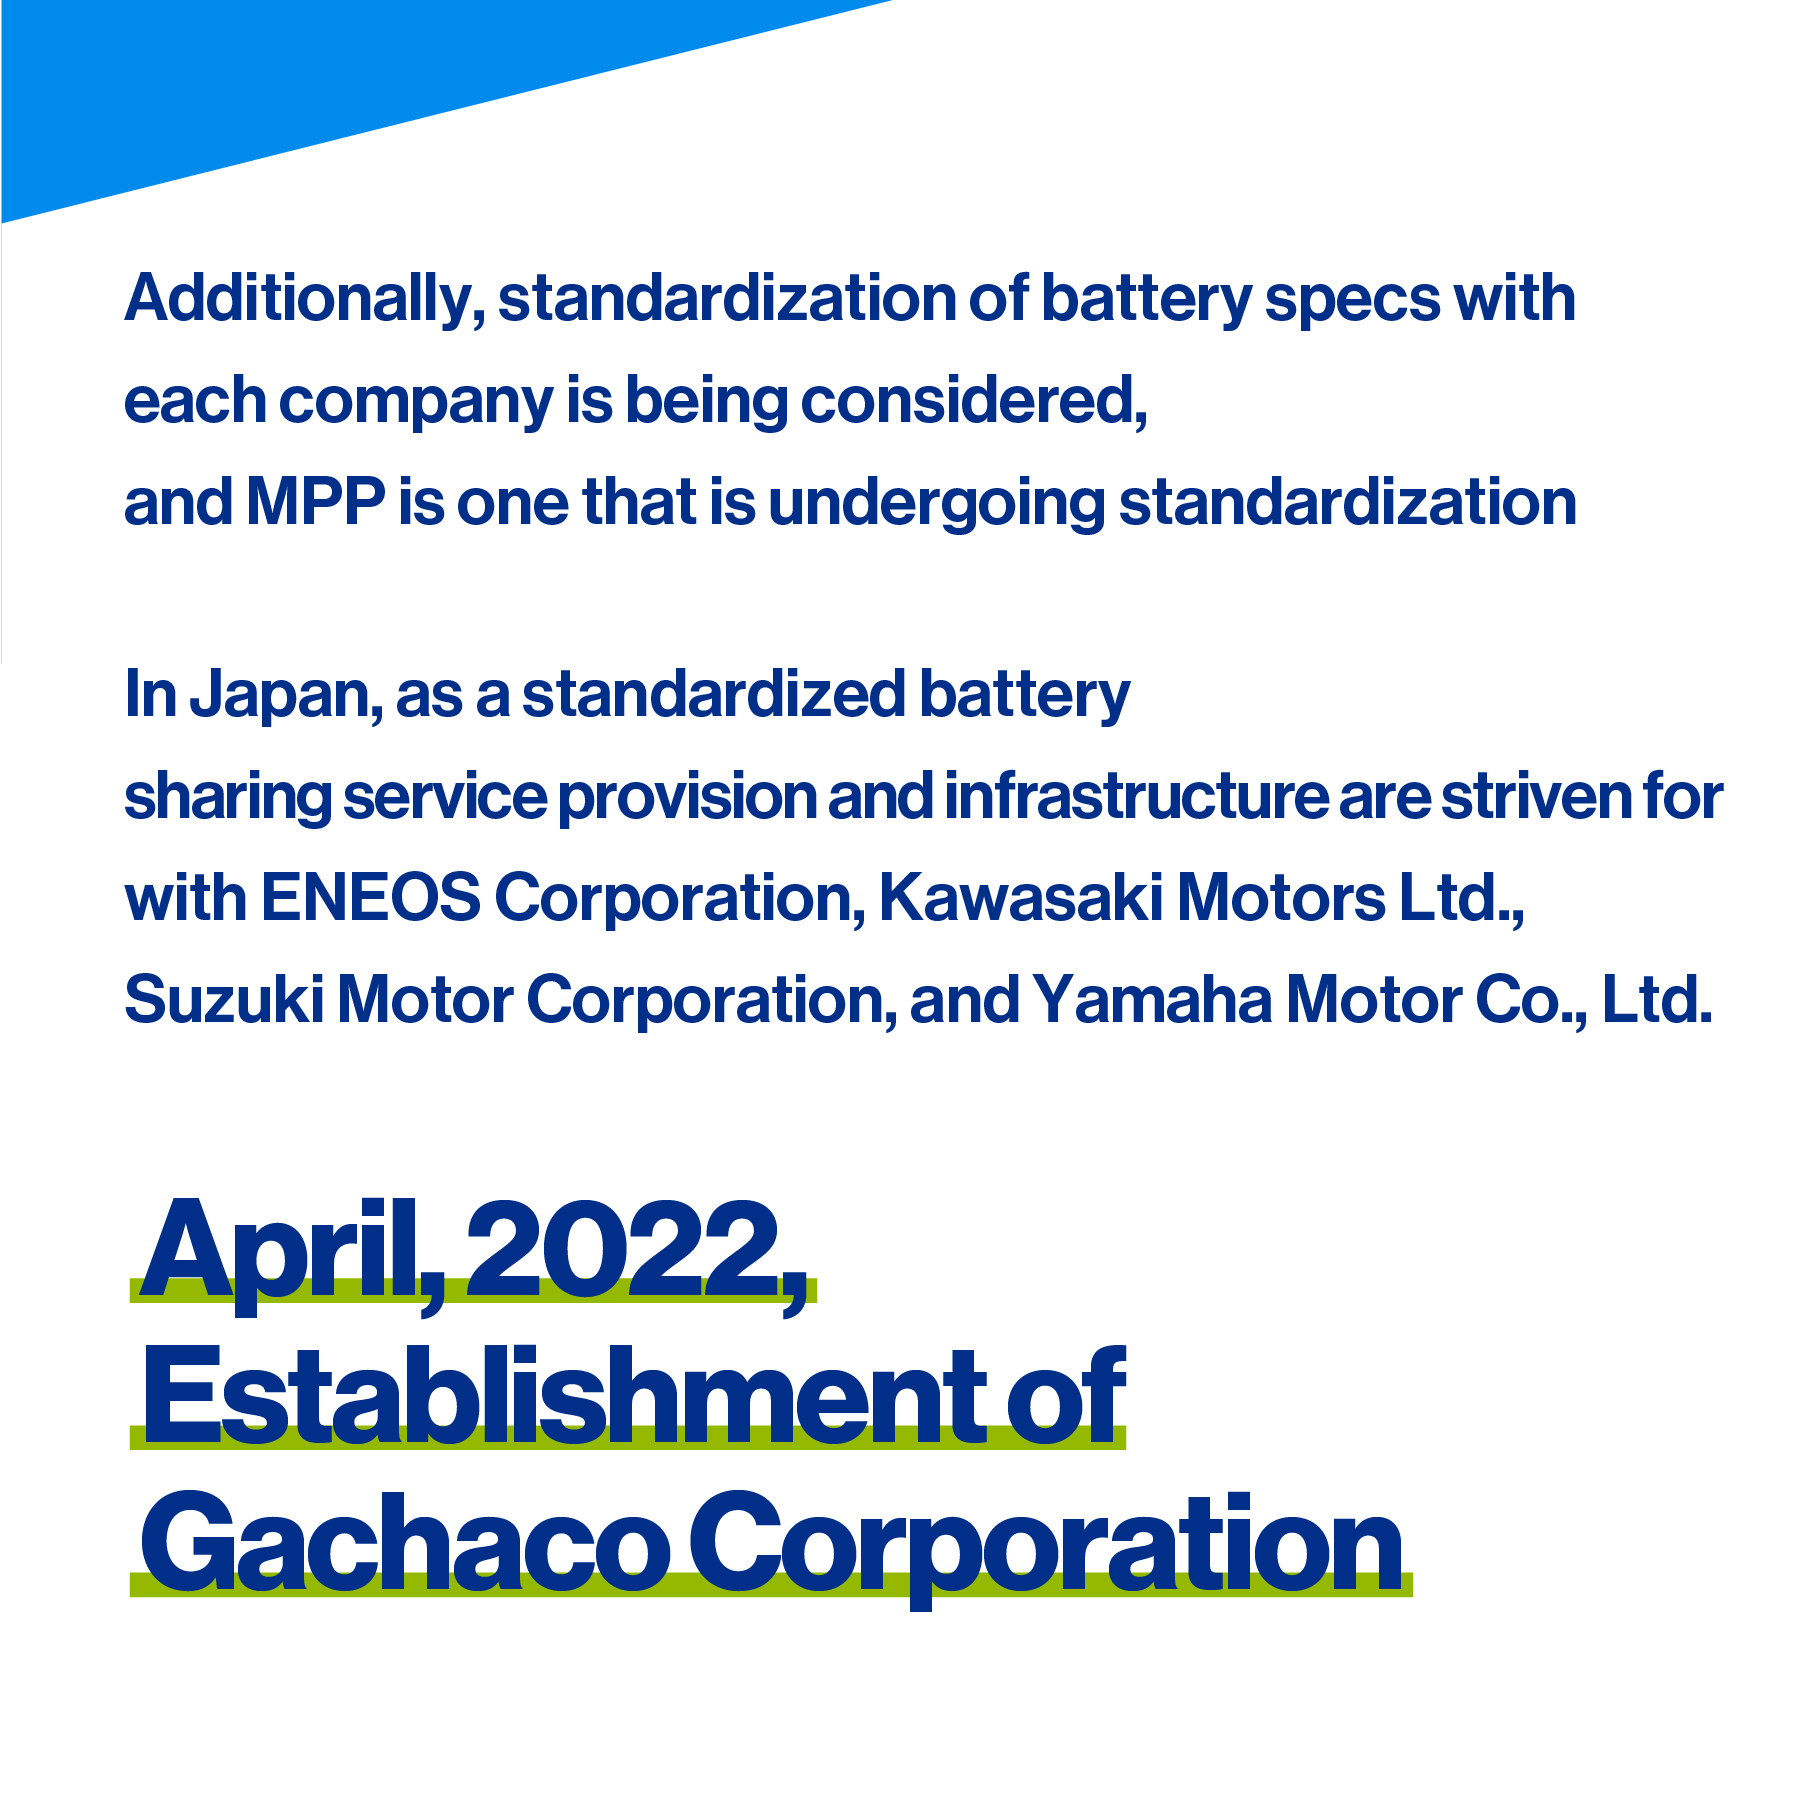 Establishment of Gachaco Corporation with the aim of providing a battery sharing service with common specifications and developing infrastructure